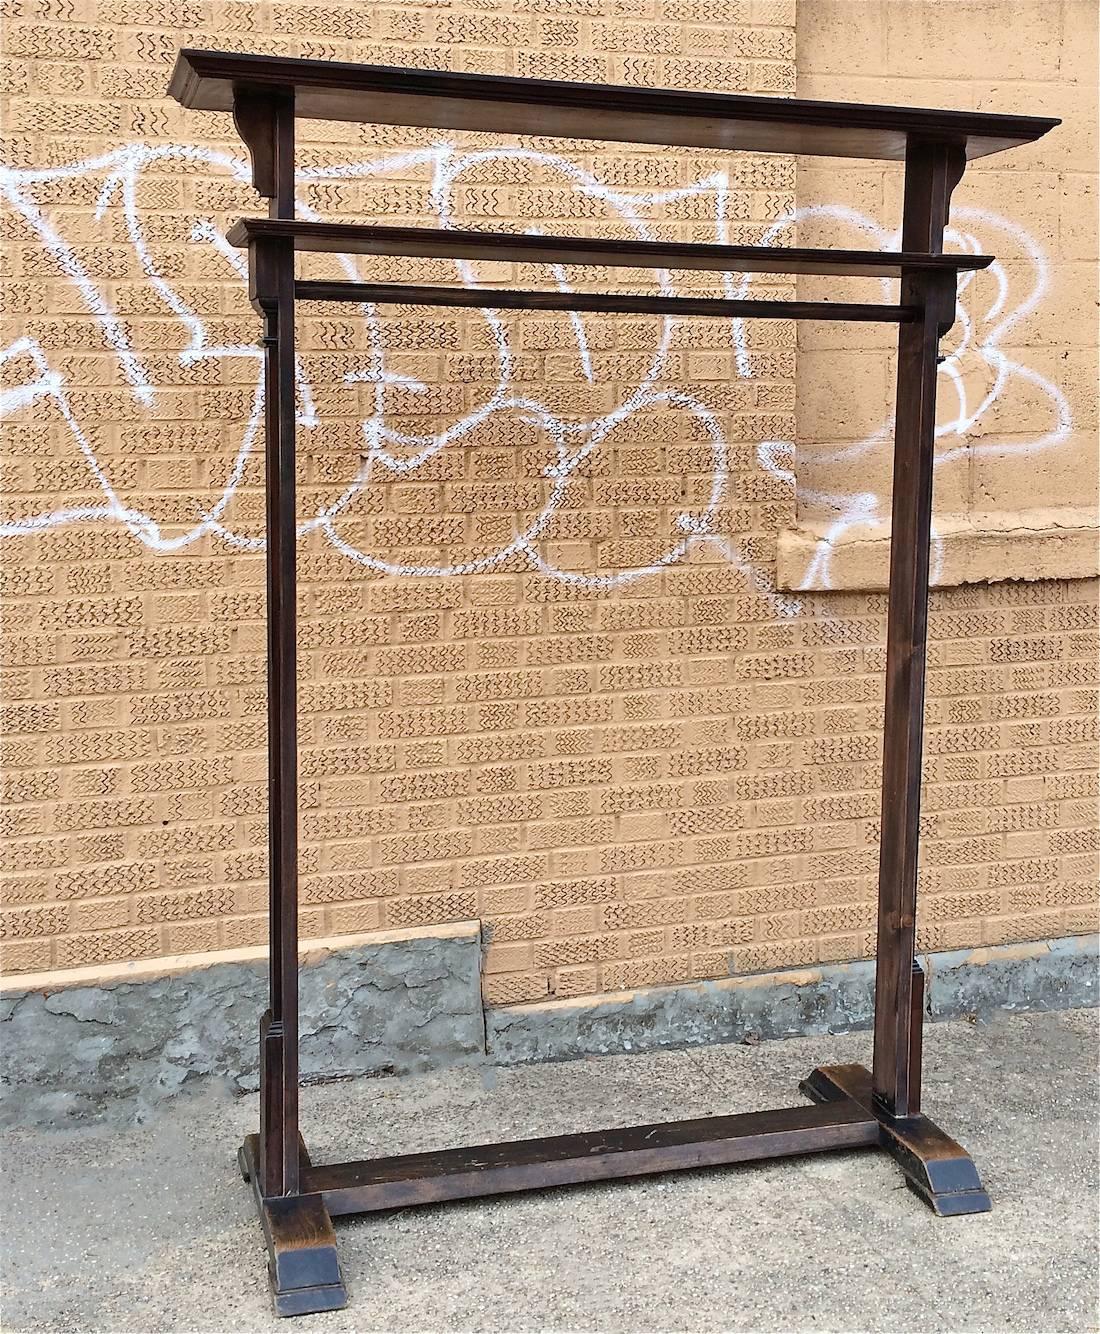 Late Victorian style, entryway coat rack made from reclaimed mahogany and maple is custom-made in Brooklyn, NY by City Foundry.